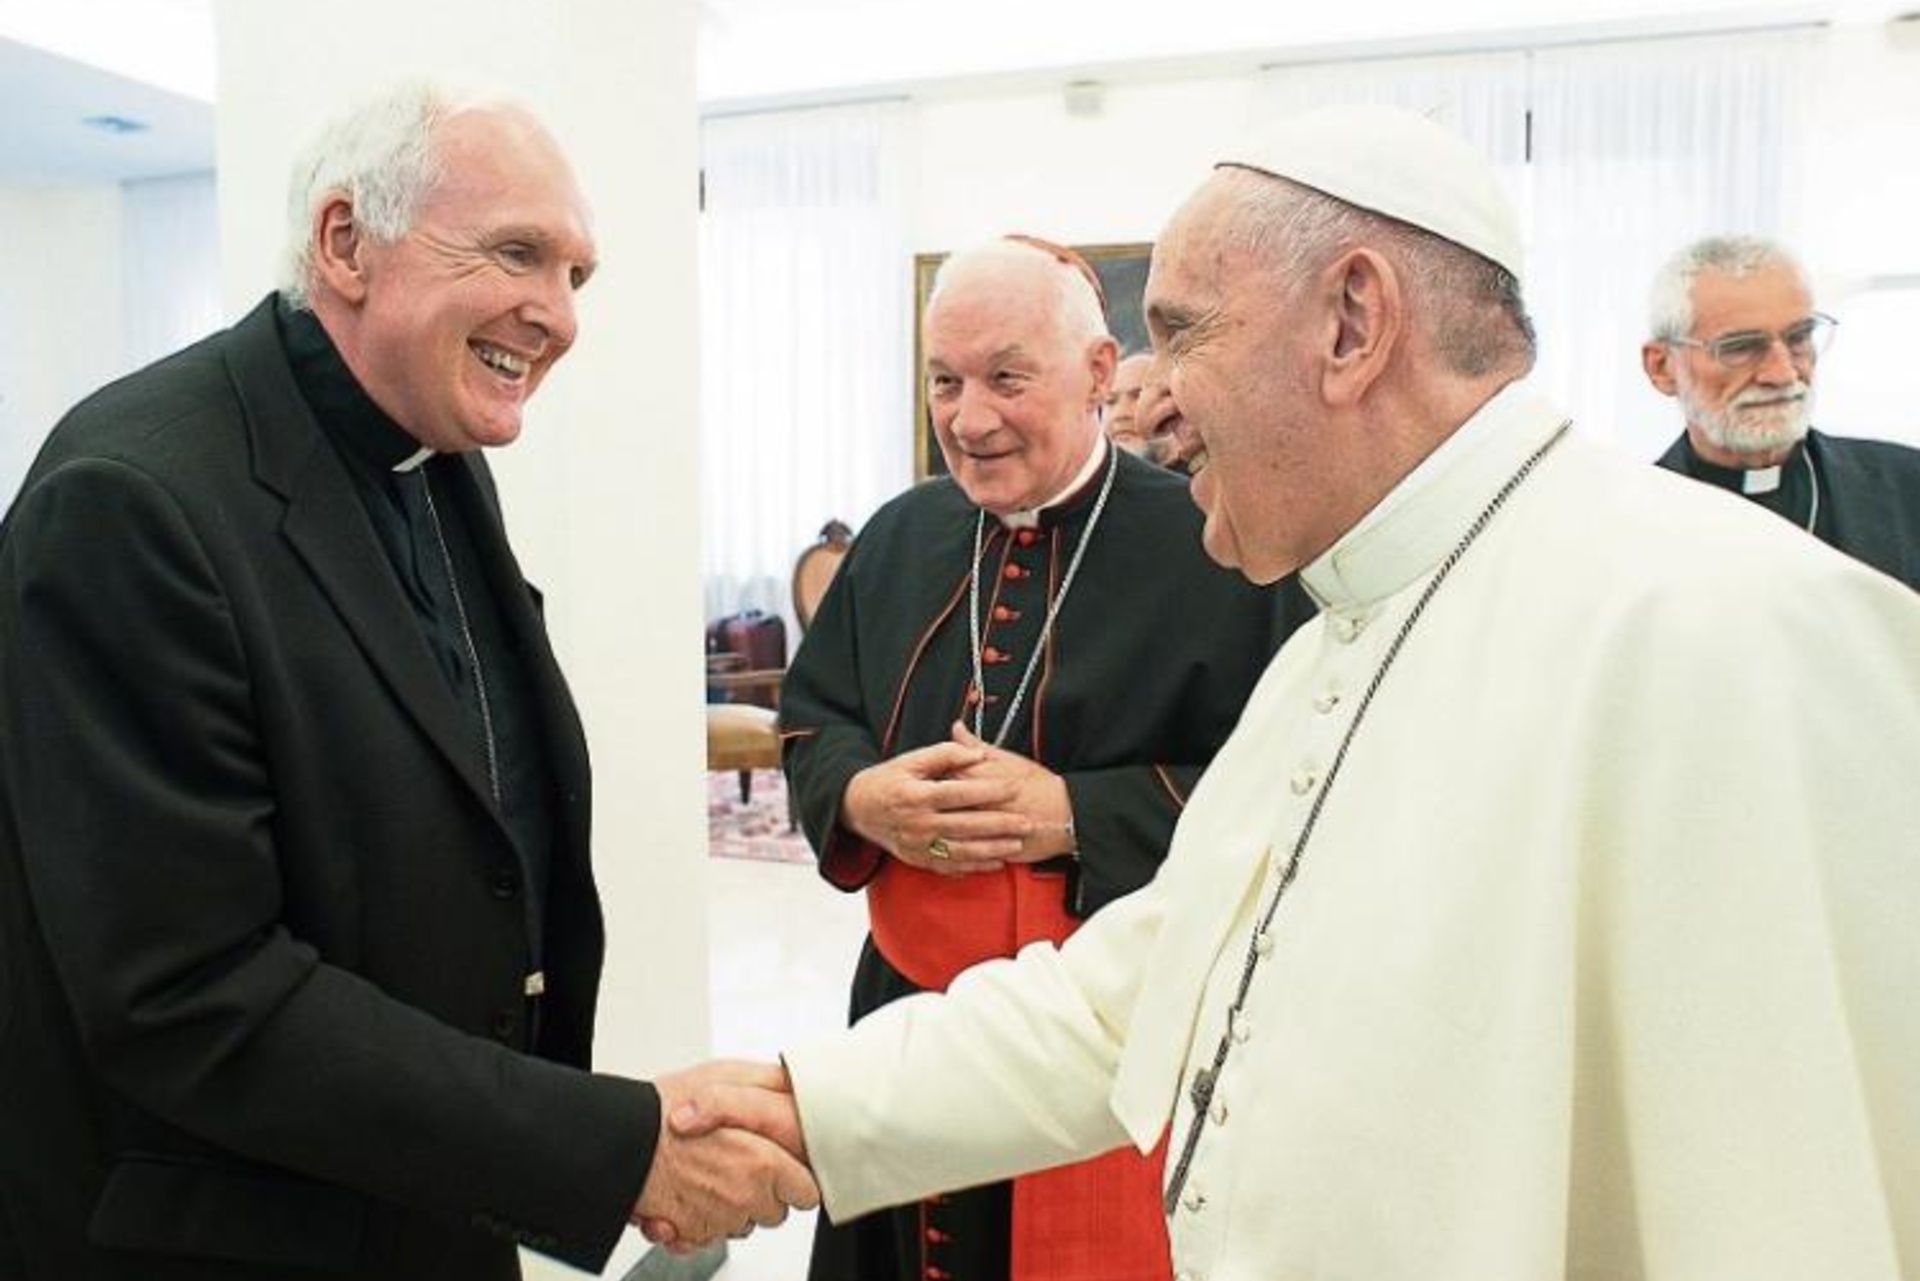 Pope conveys special fondness for Limerick, says Bishop Leahy after lunch with Pontiff